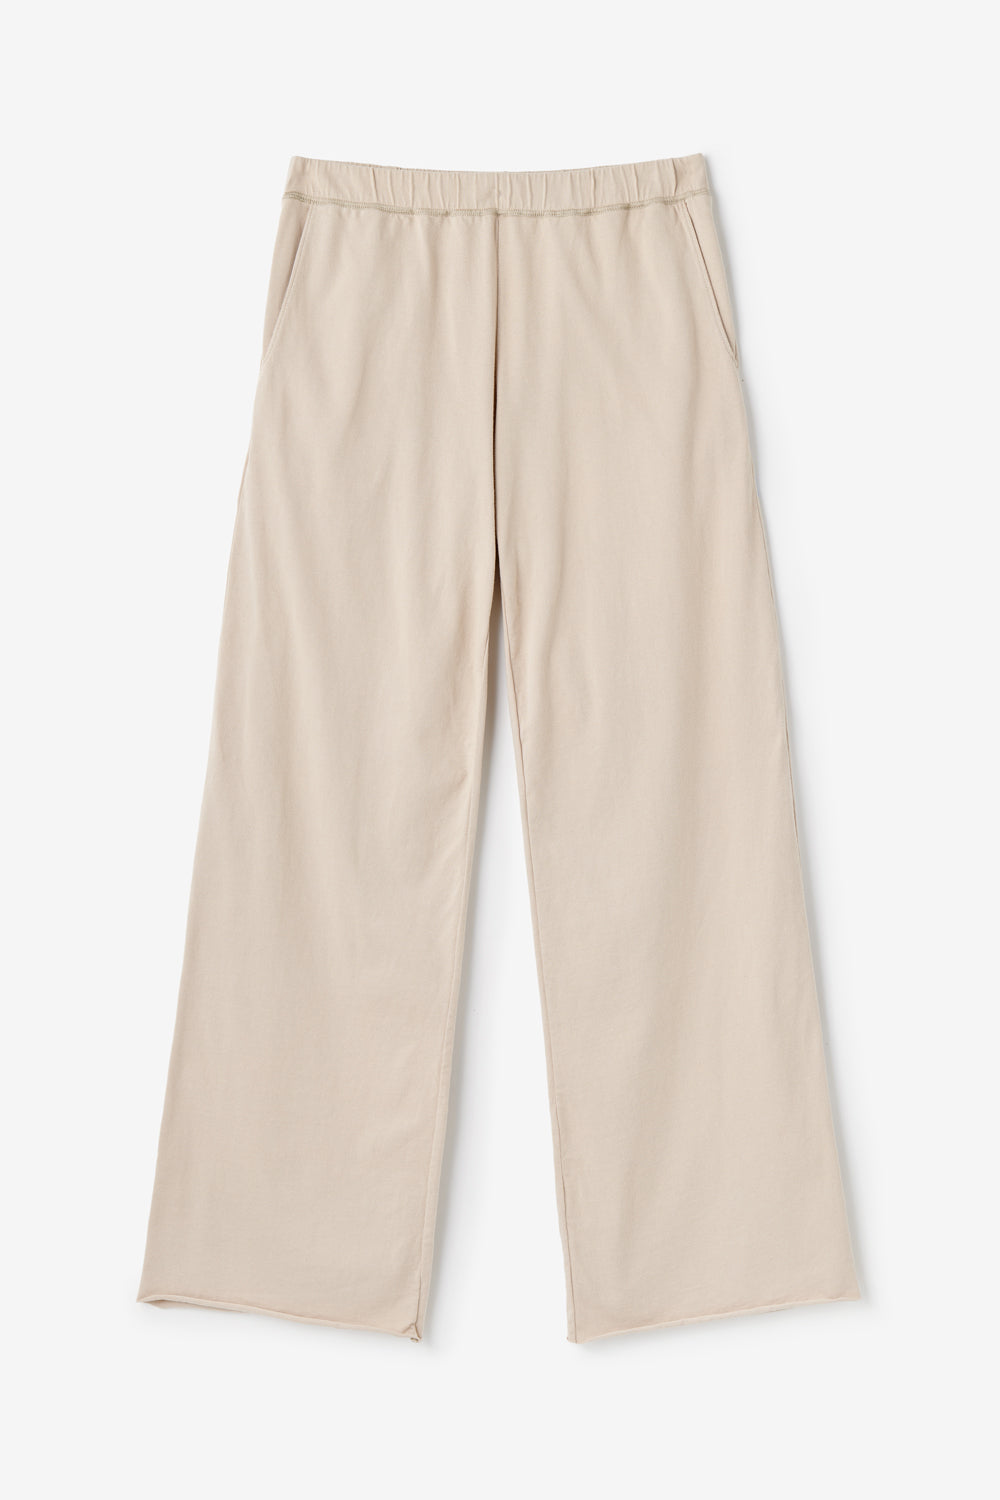 Alabama Chanin Adrienne Pant wide leg pant made of 100% organic cotton in wax.